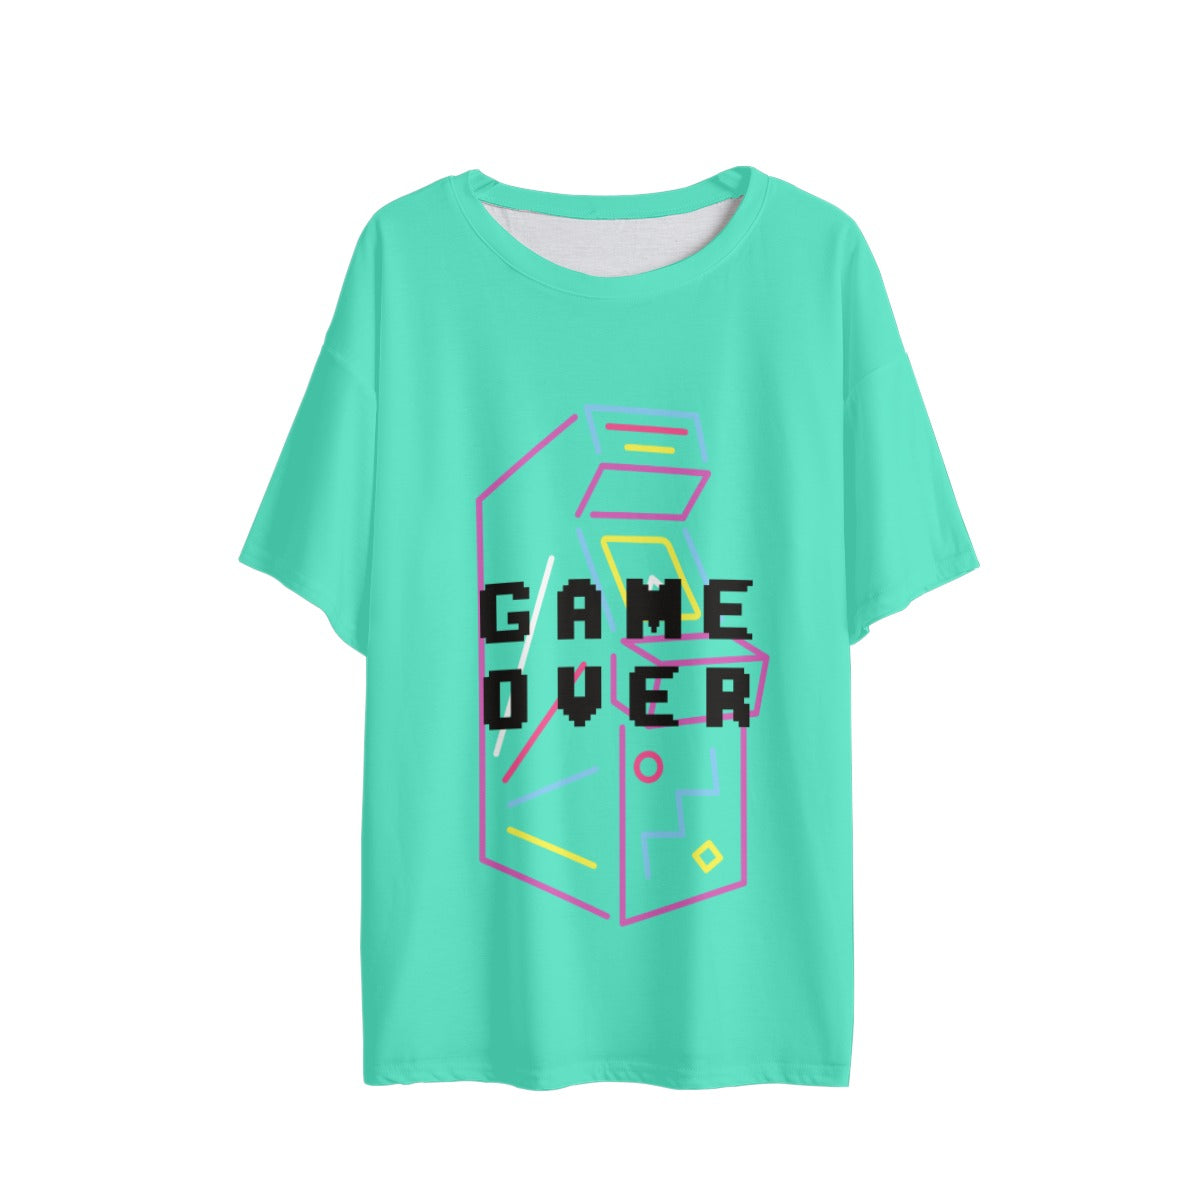 "GAME OVER" Tee